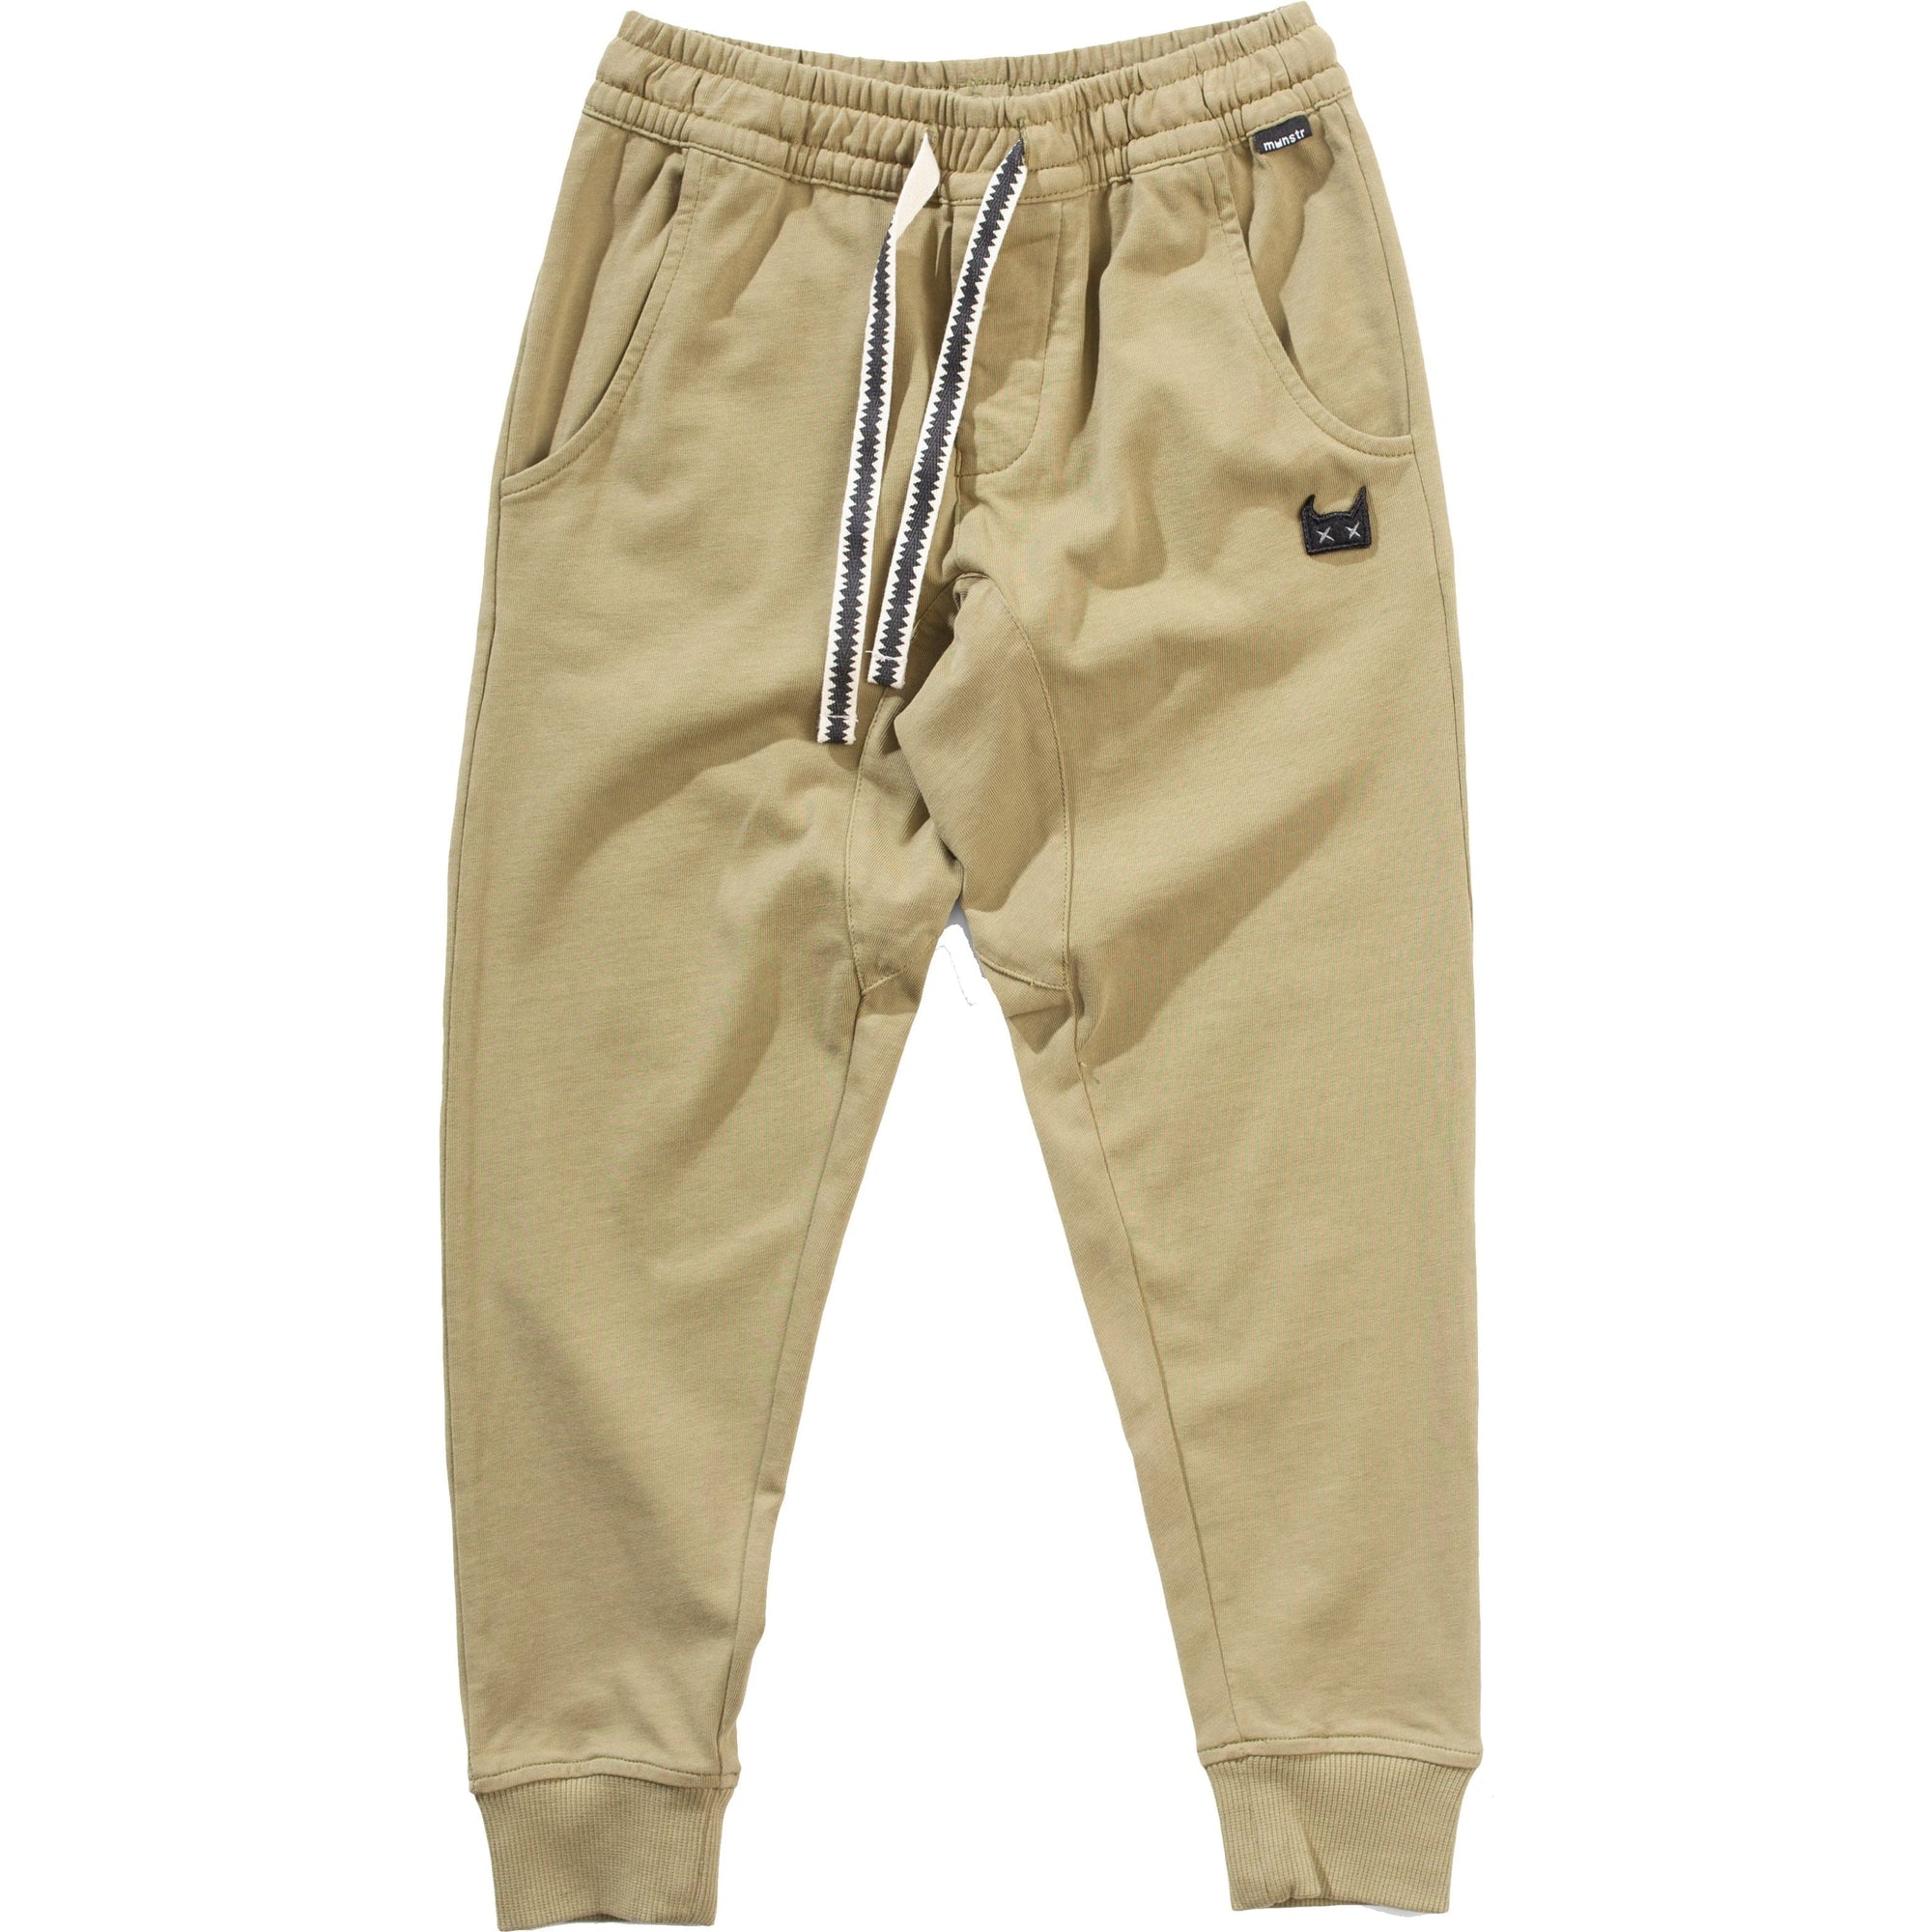 Wannaplay Pant - Lt Olive